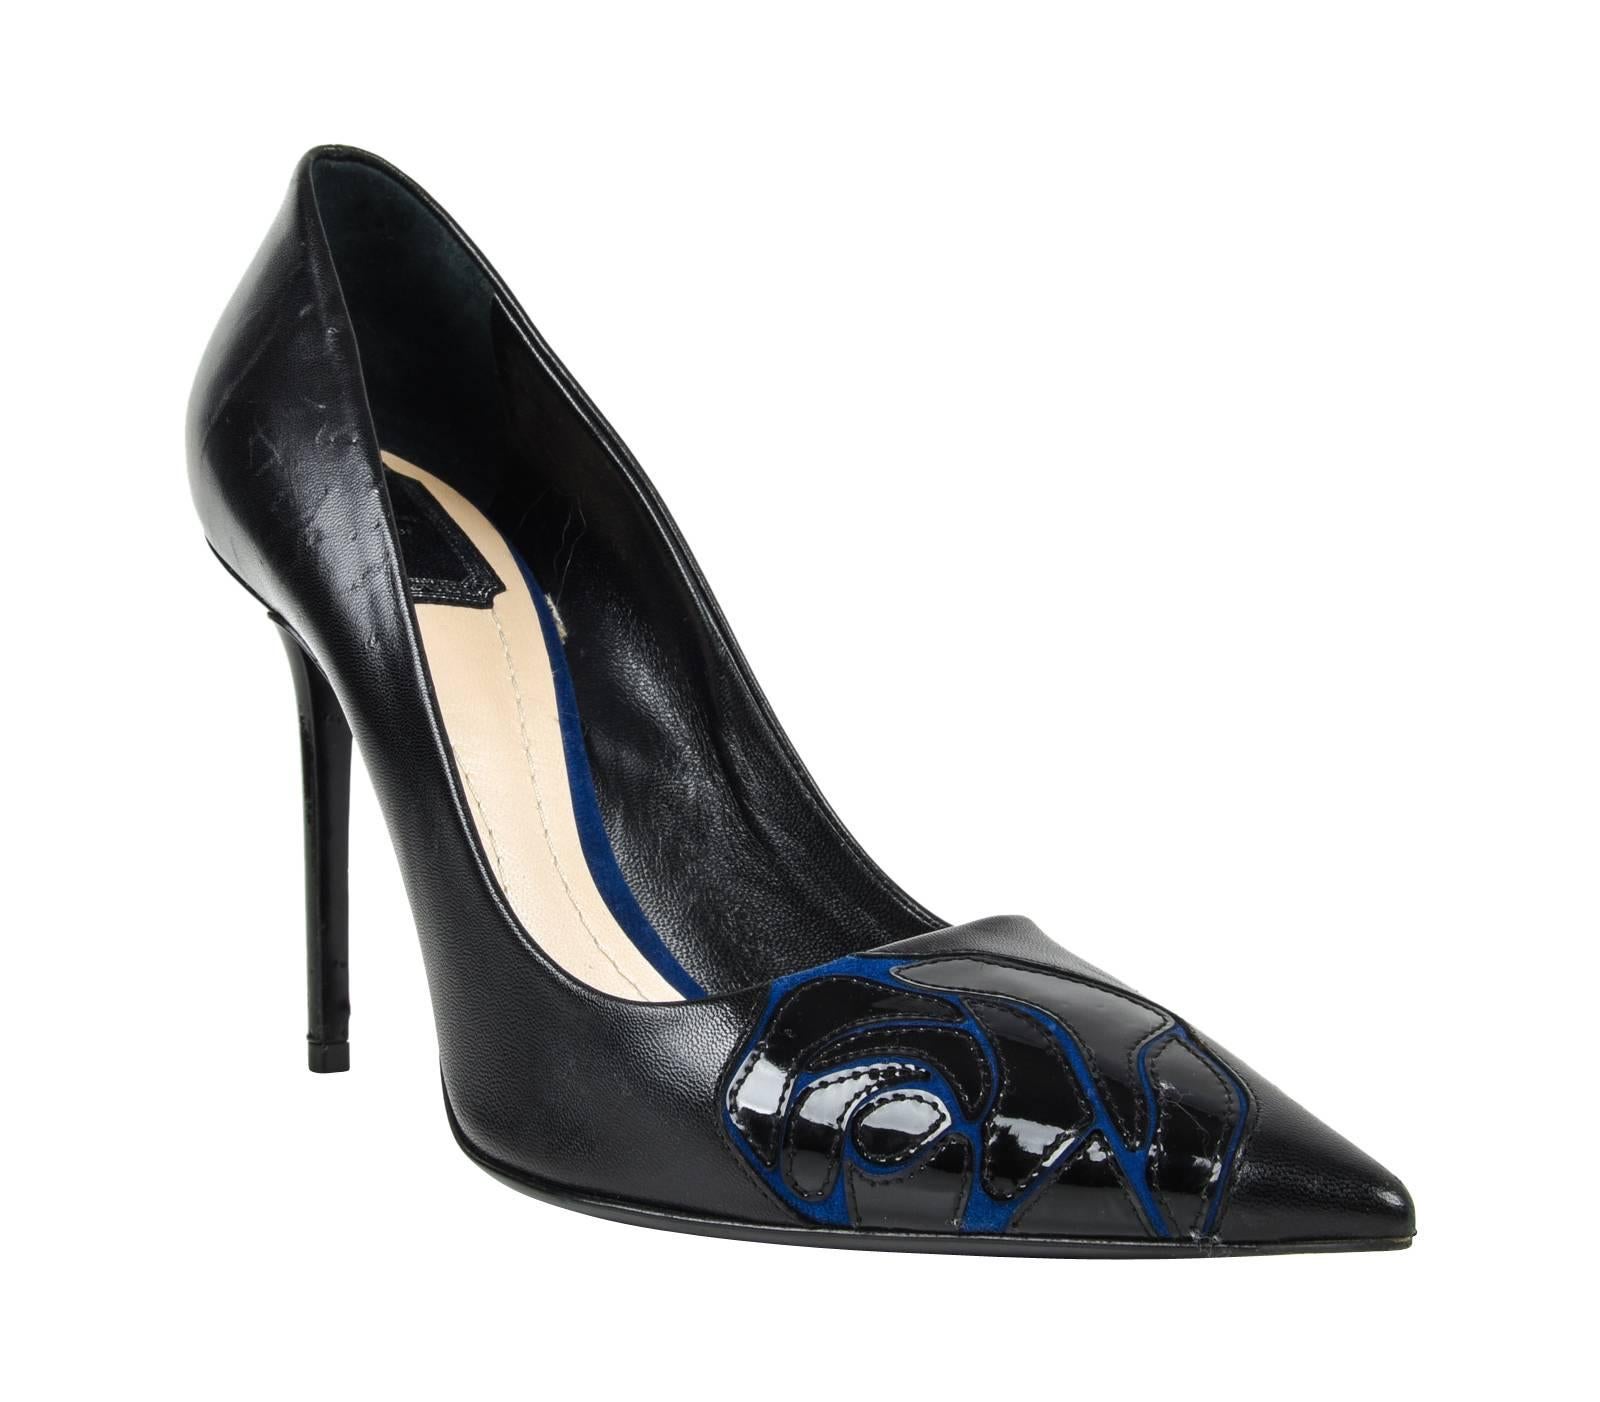 Guaranteed authentic Christian Dior black leather pump with patent leather rose applique.
The rose is edged in navy blue suede for a beautiful effect.
Classic pointed toe and 4